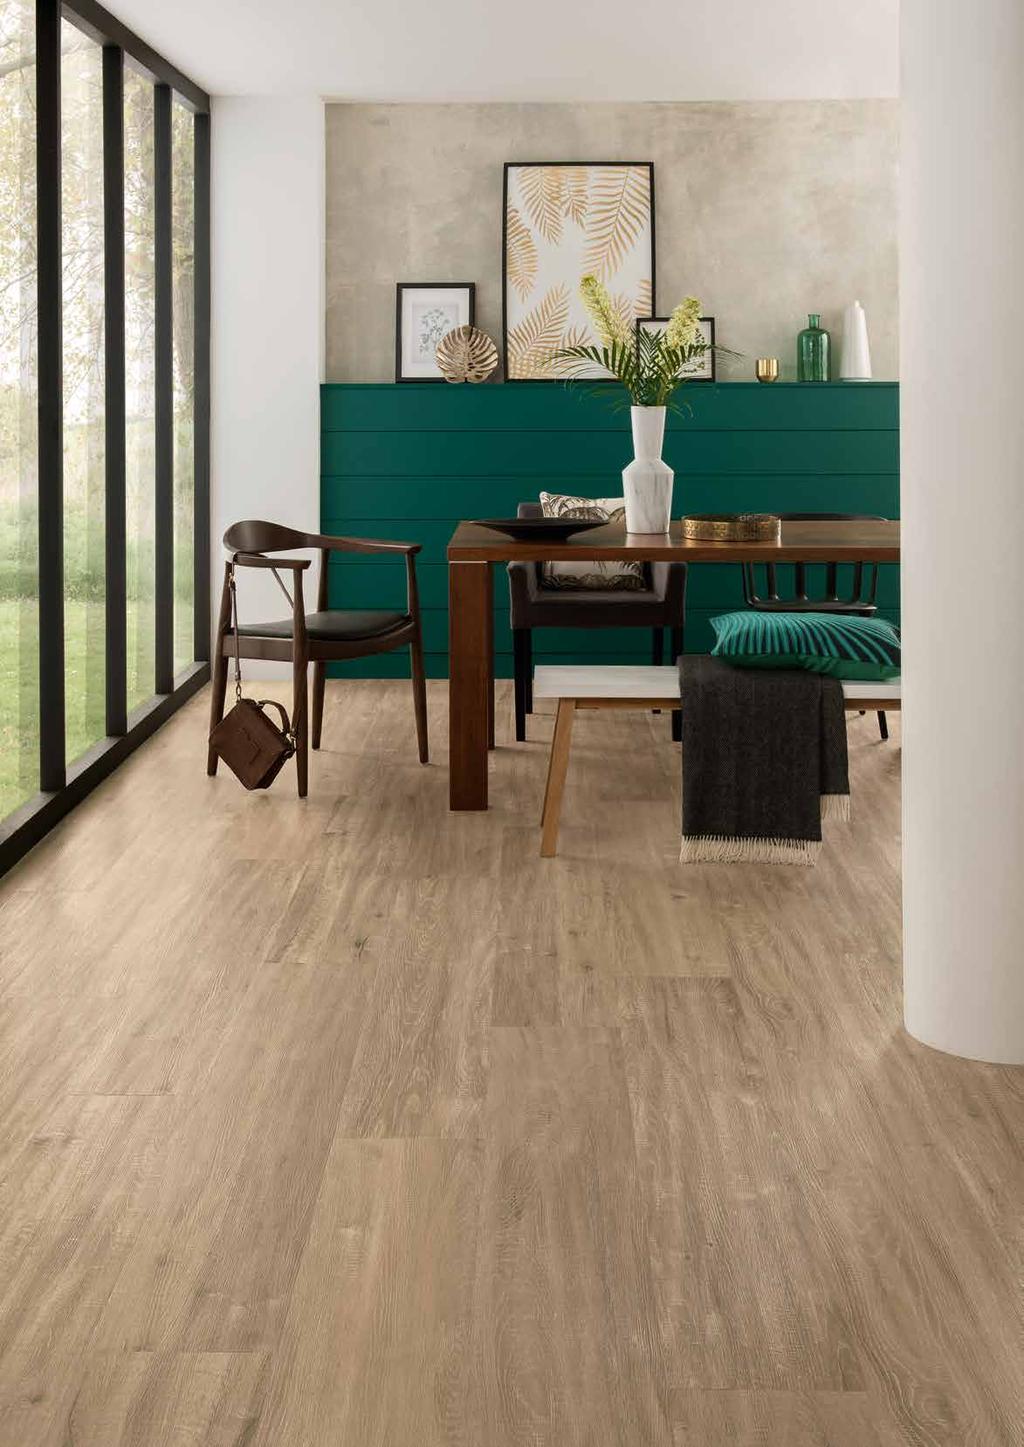 Neutral Oak offers a truly authentic wood floor look, ideal